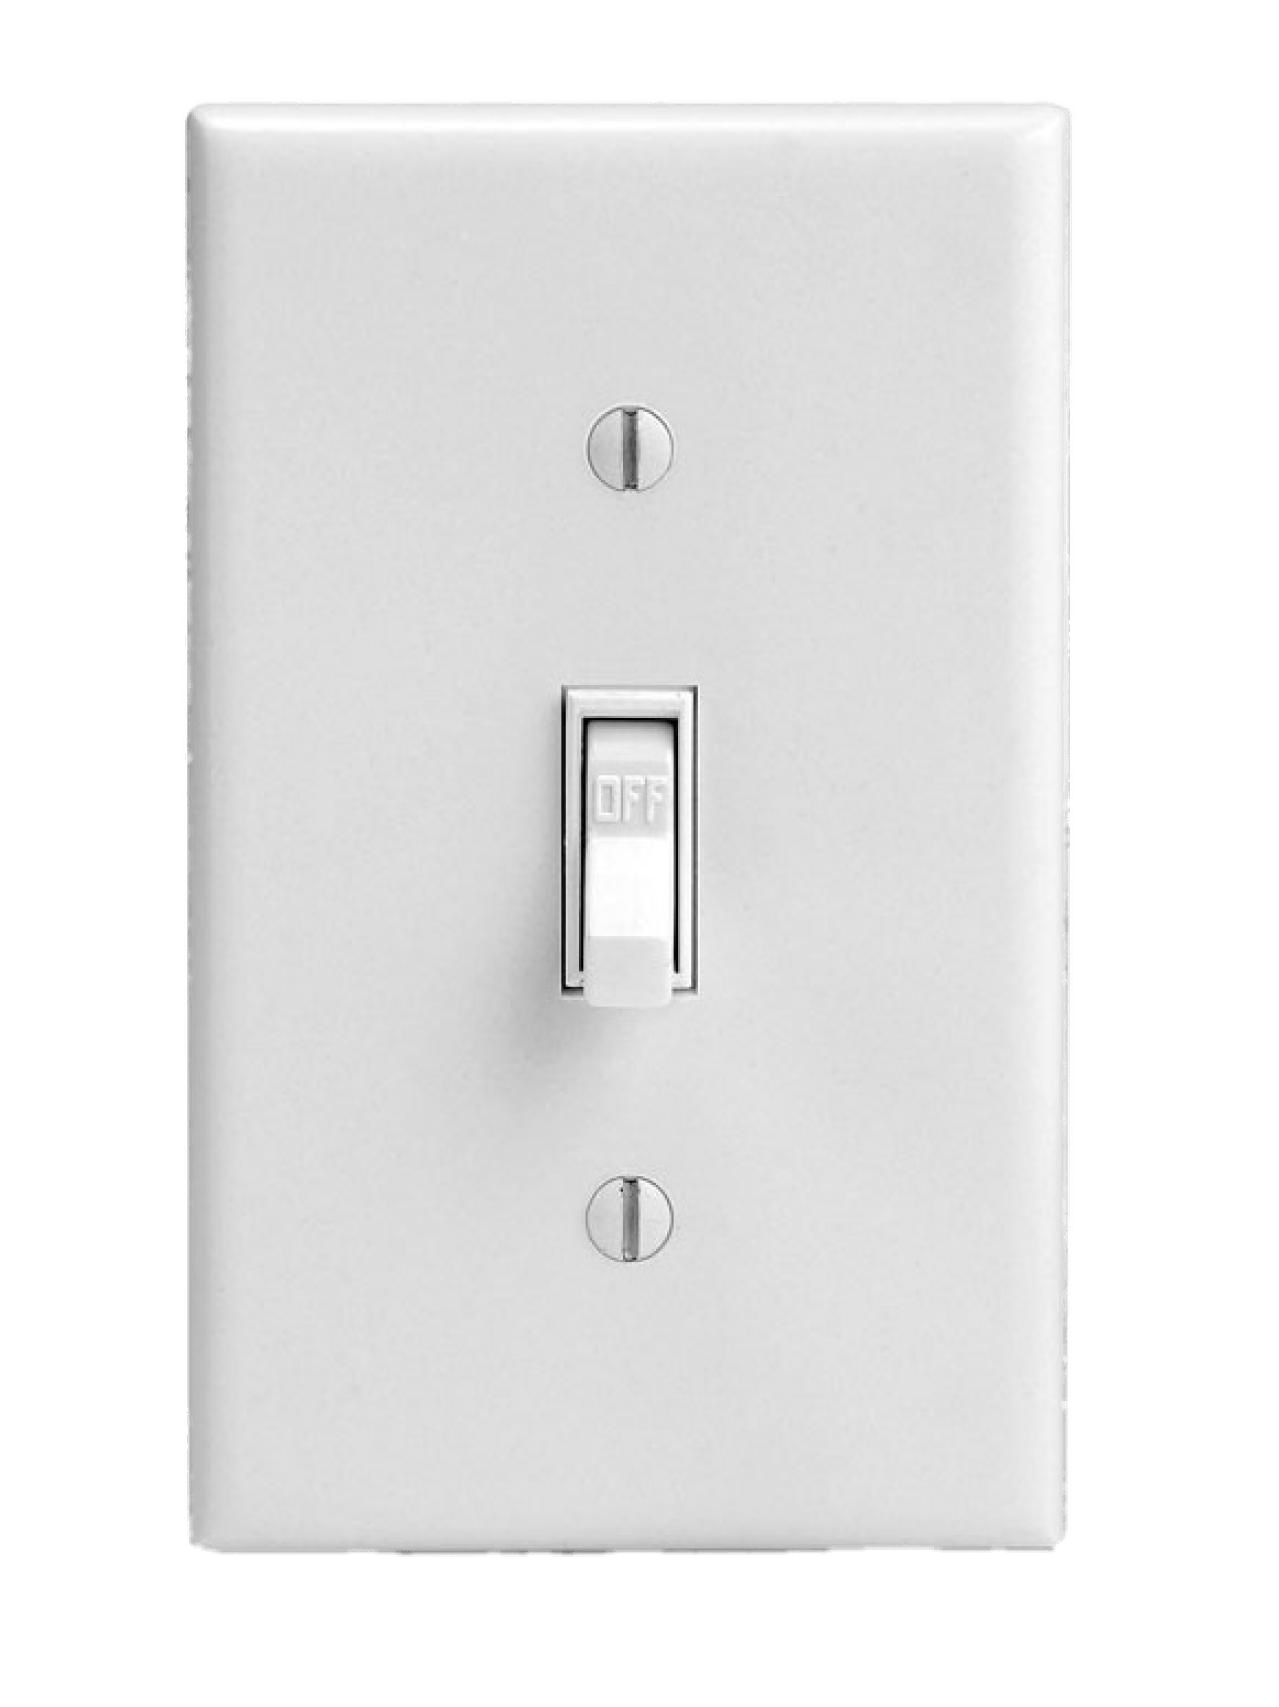 Electrical Switch PNG Image Background